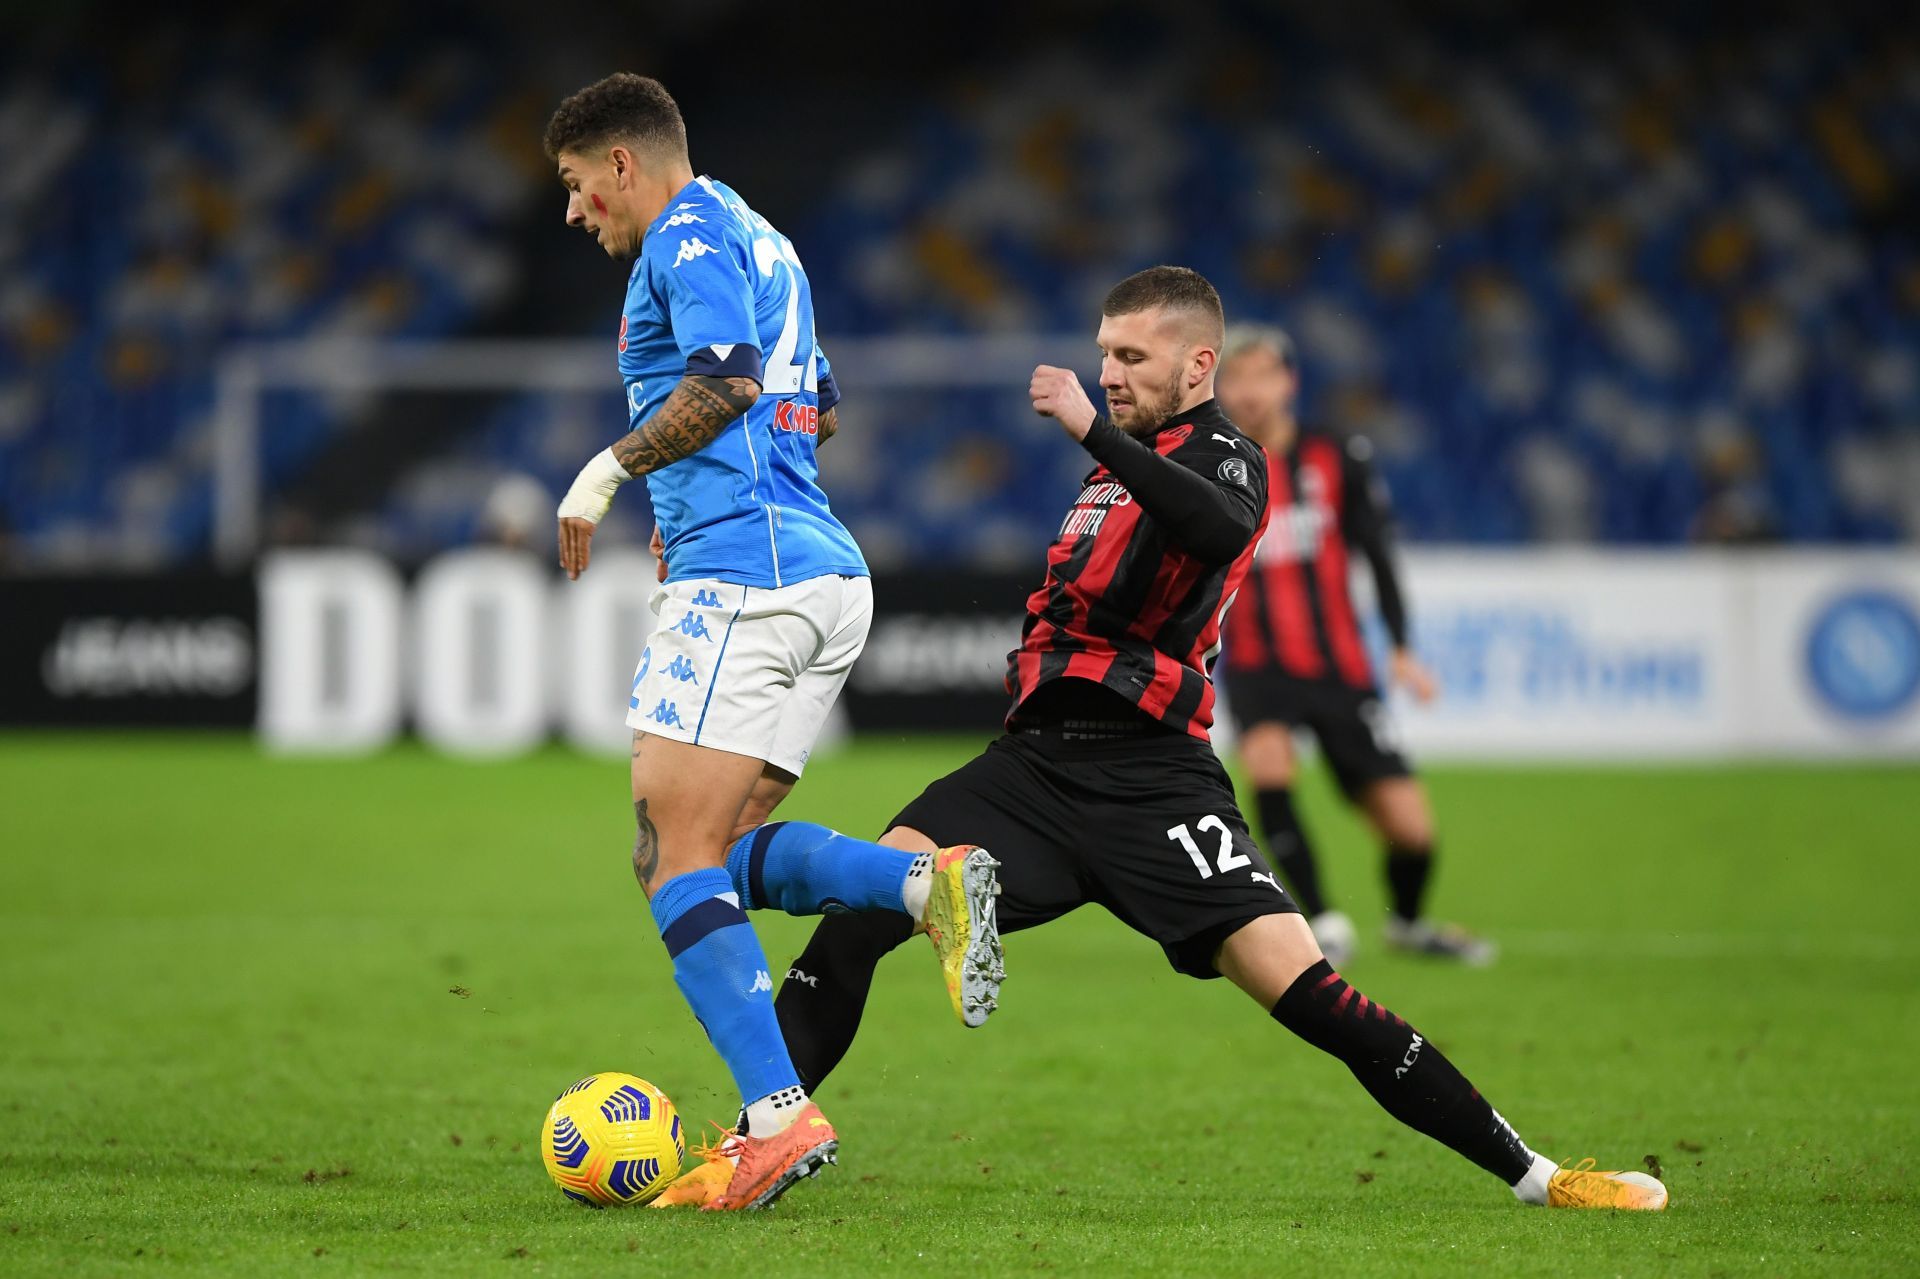 Napoli and AC Milan will lock horns in an enticing encounter.